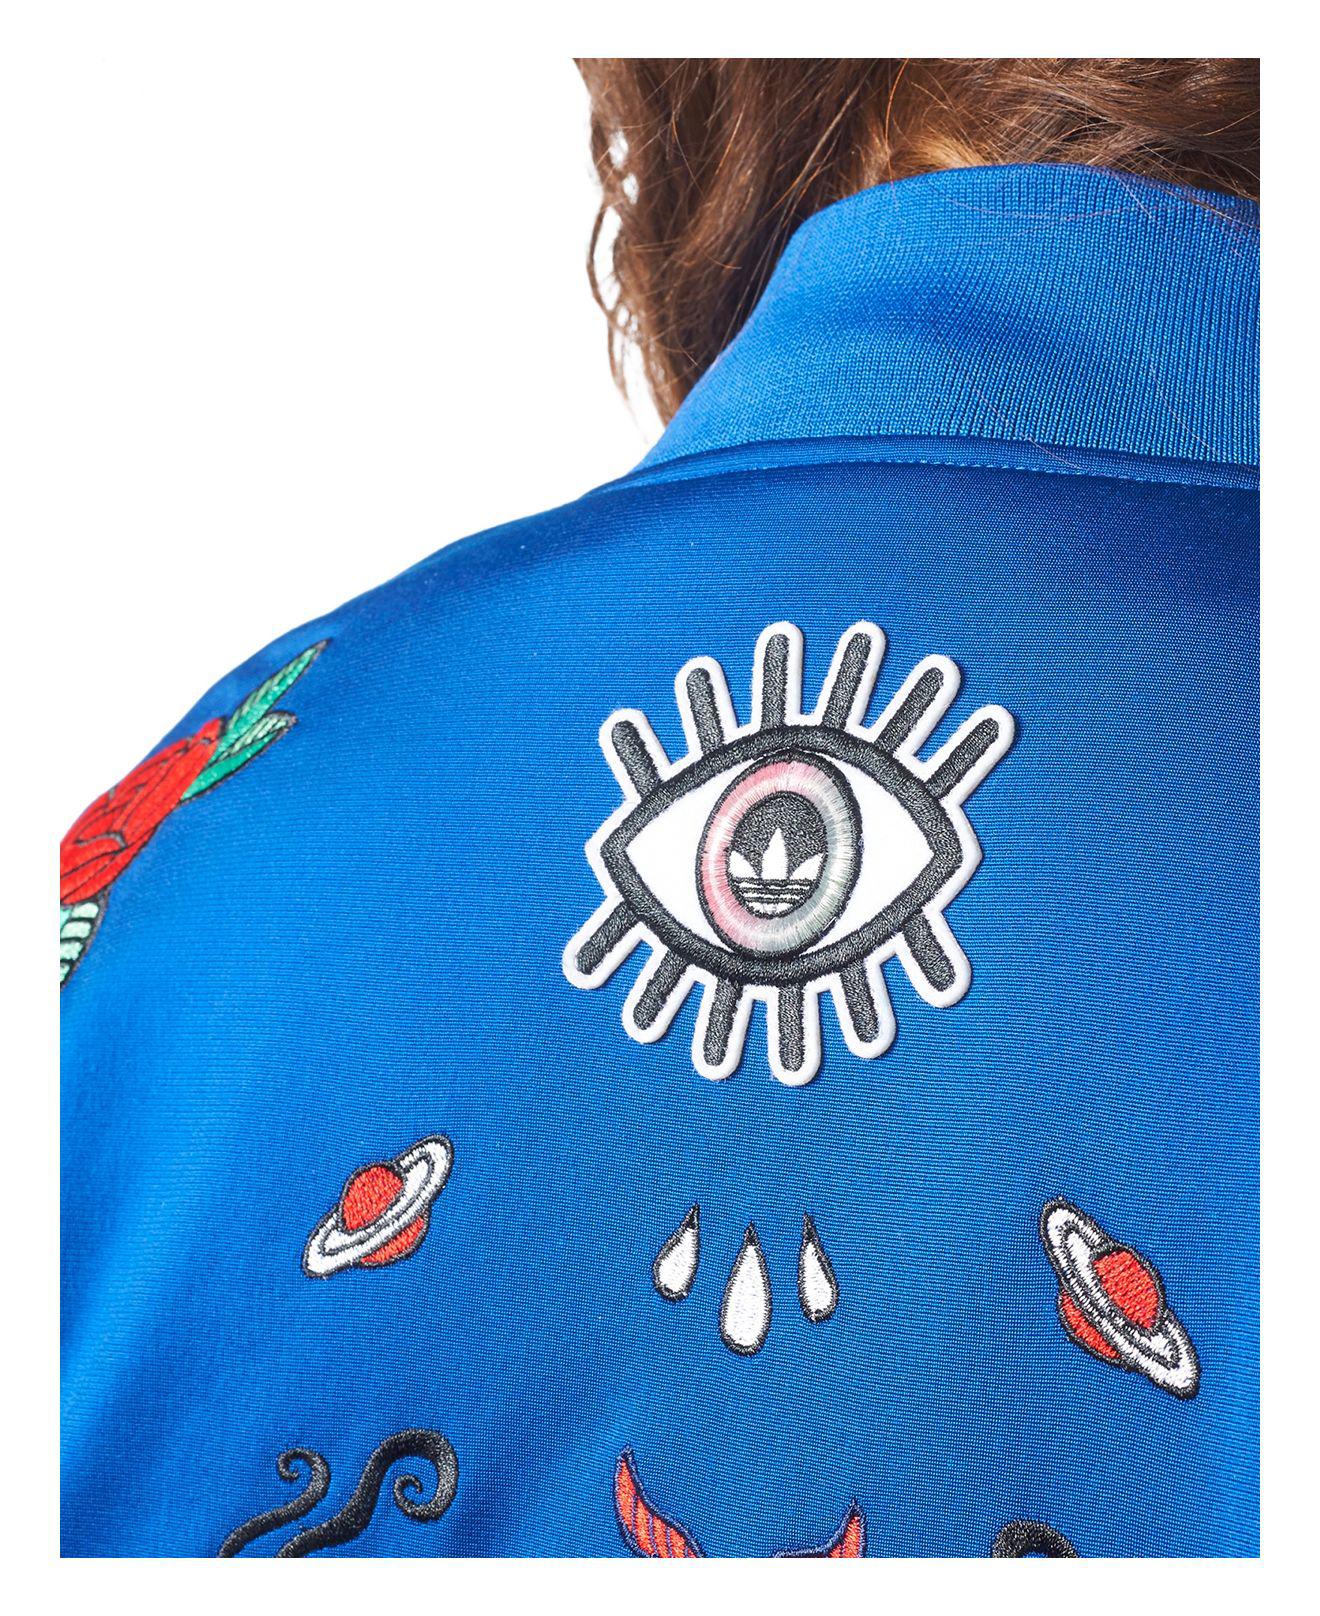 jacket with patches